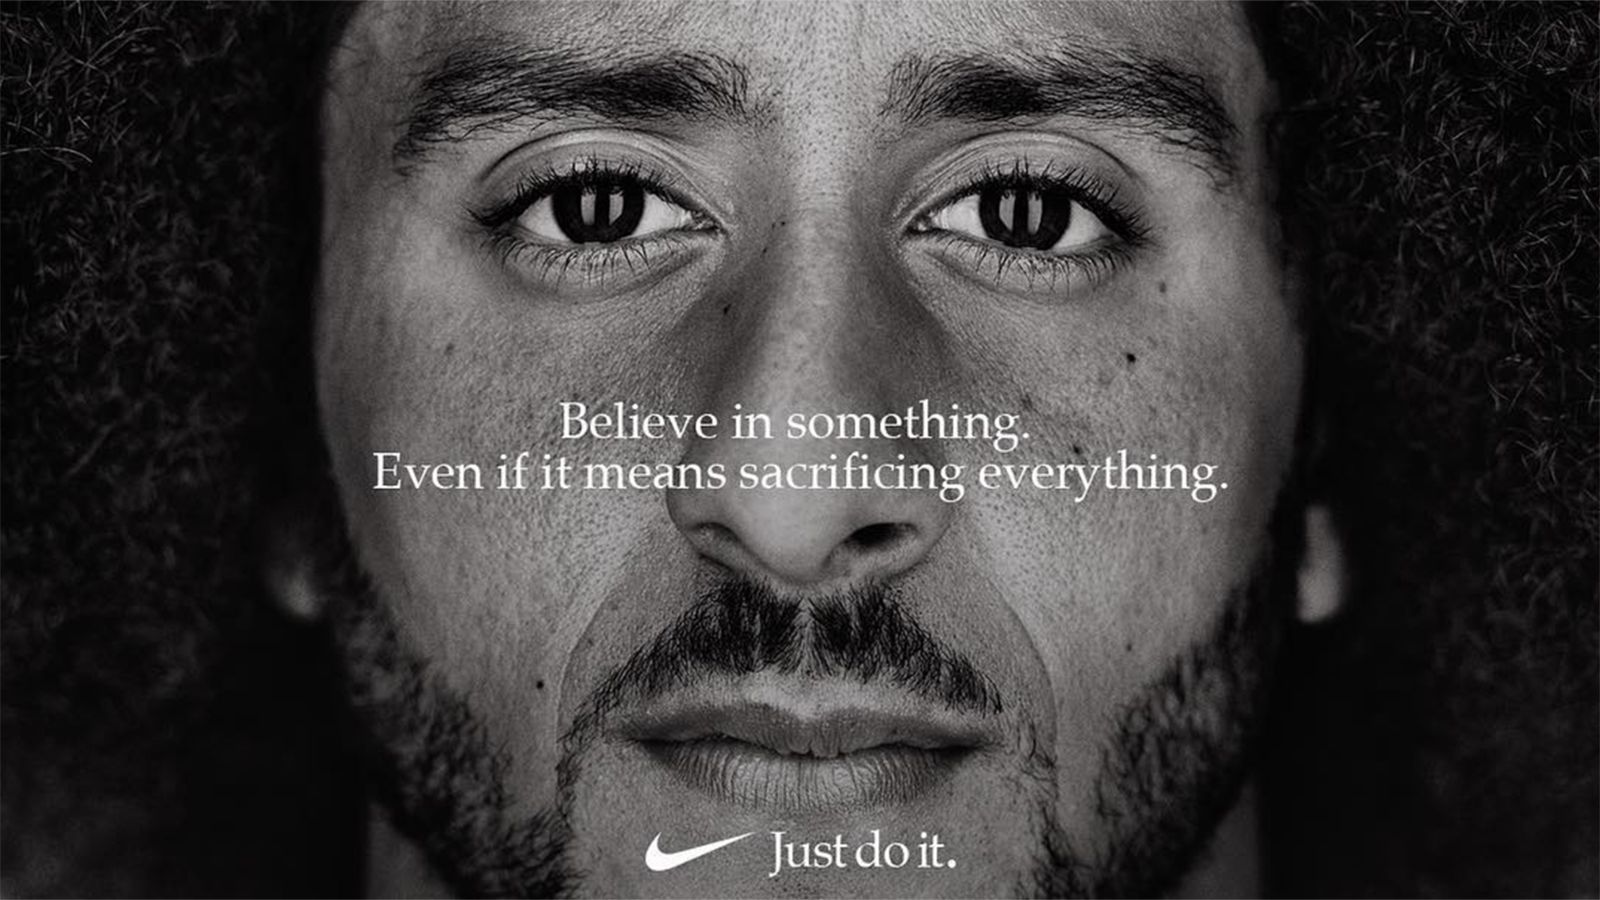 Colin Kaepernick's Nike ad wins Emmy for outstanding commercial